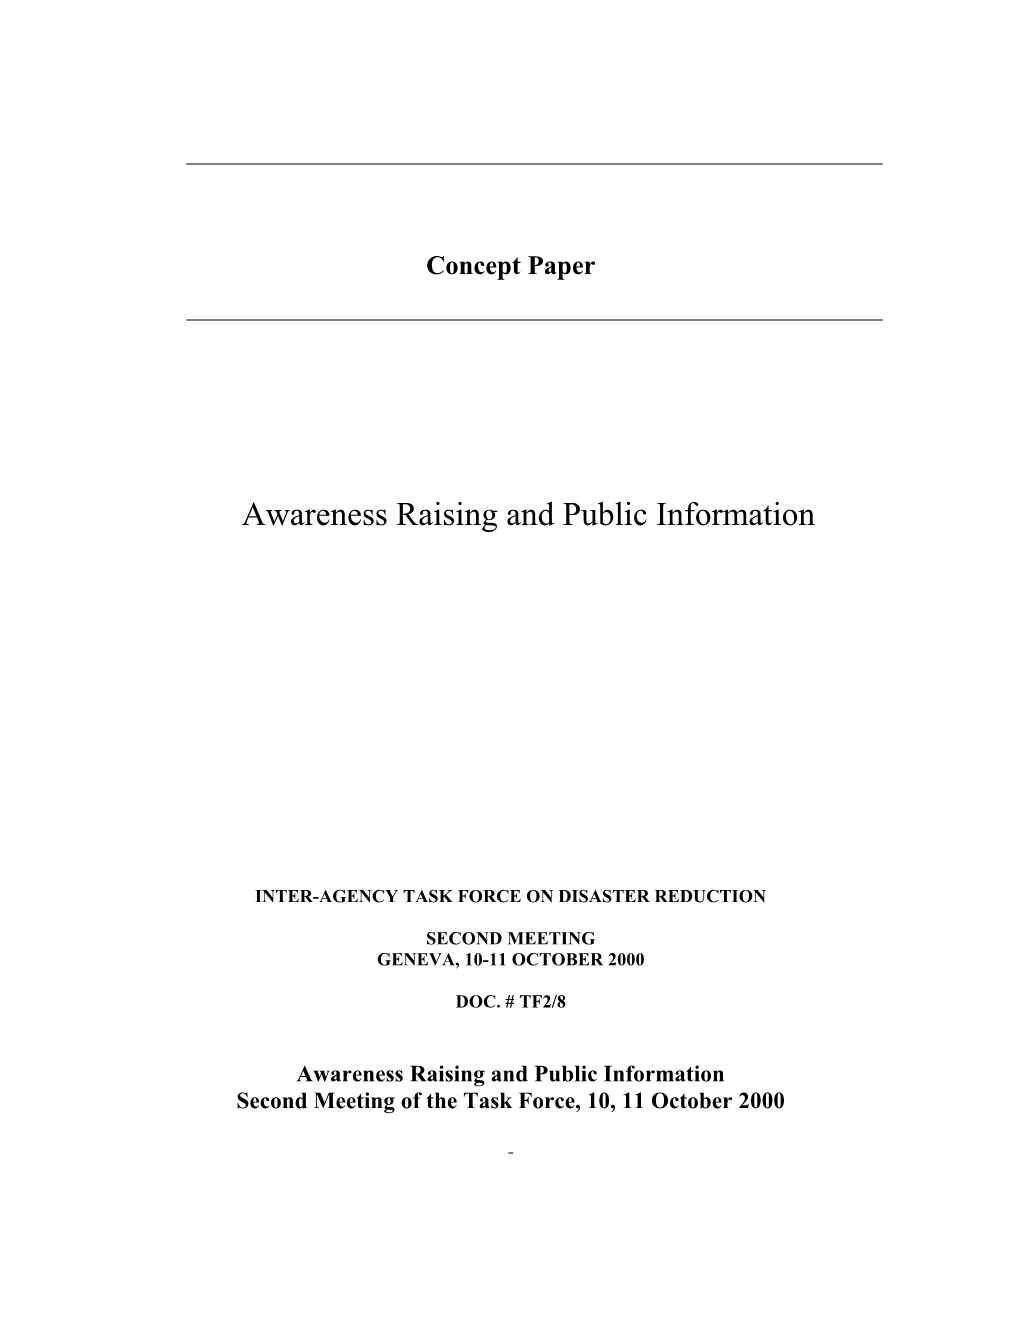 Concept Paper on Promotion and Public Awareness and Advocacy